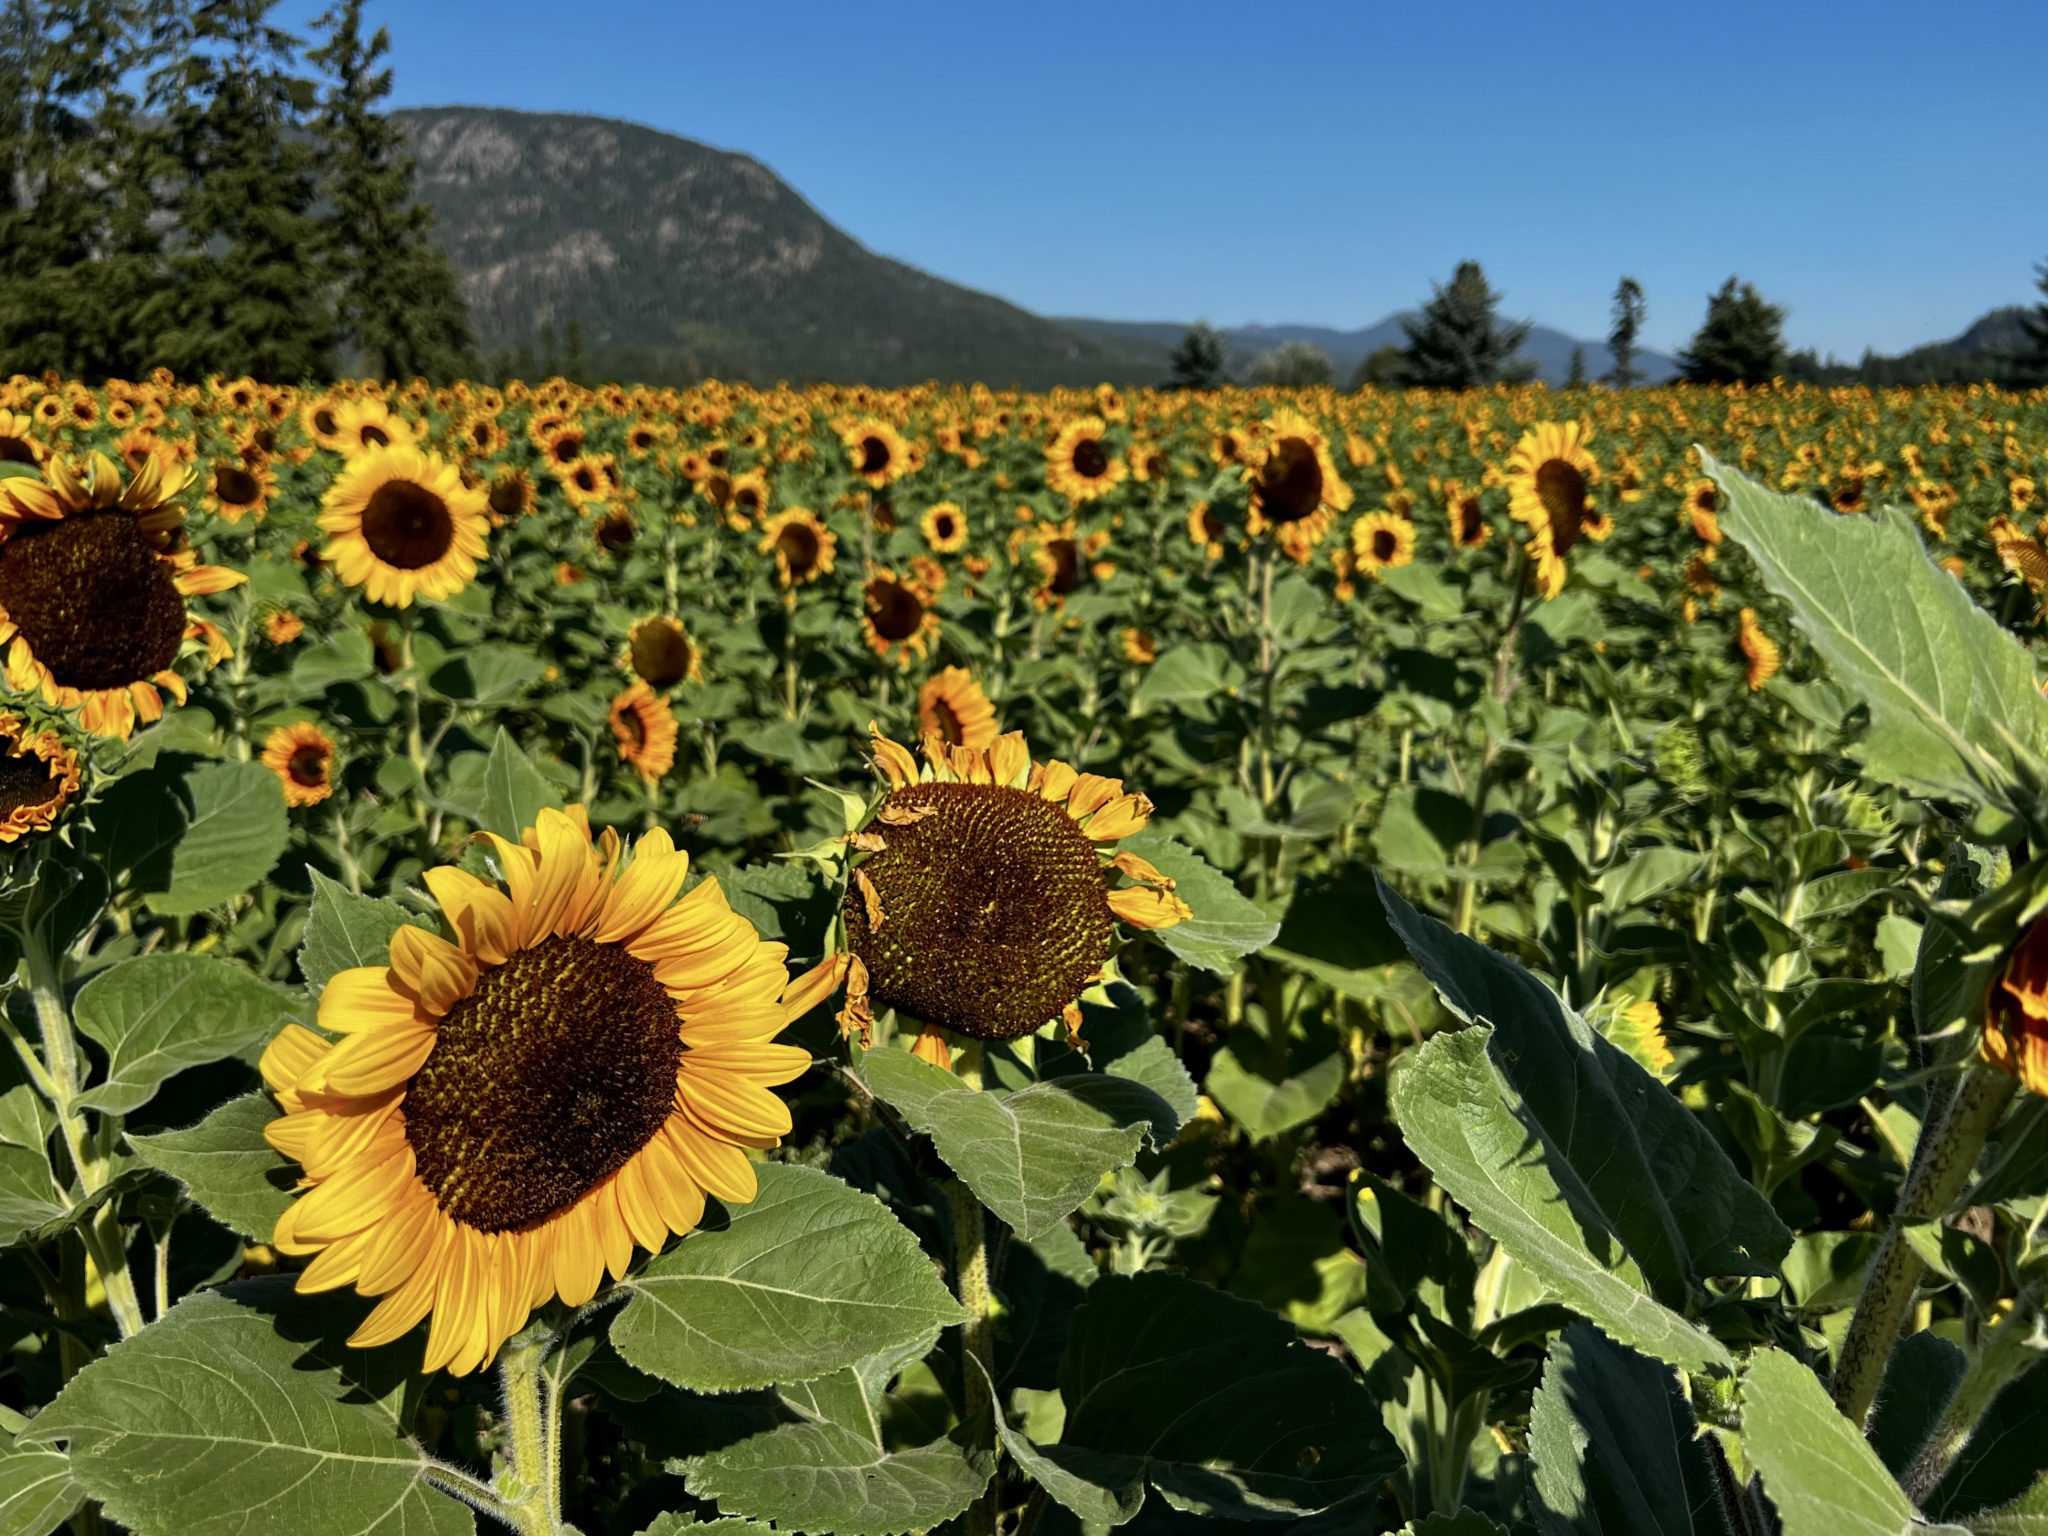 Field of Solana Number 12 sunflowers at a flower farm in August 2022 - photo by Mary Jane Duford